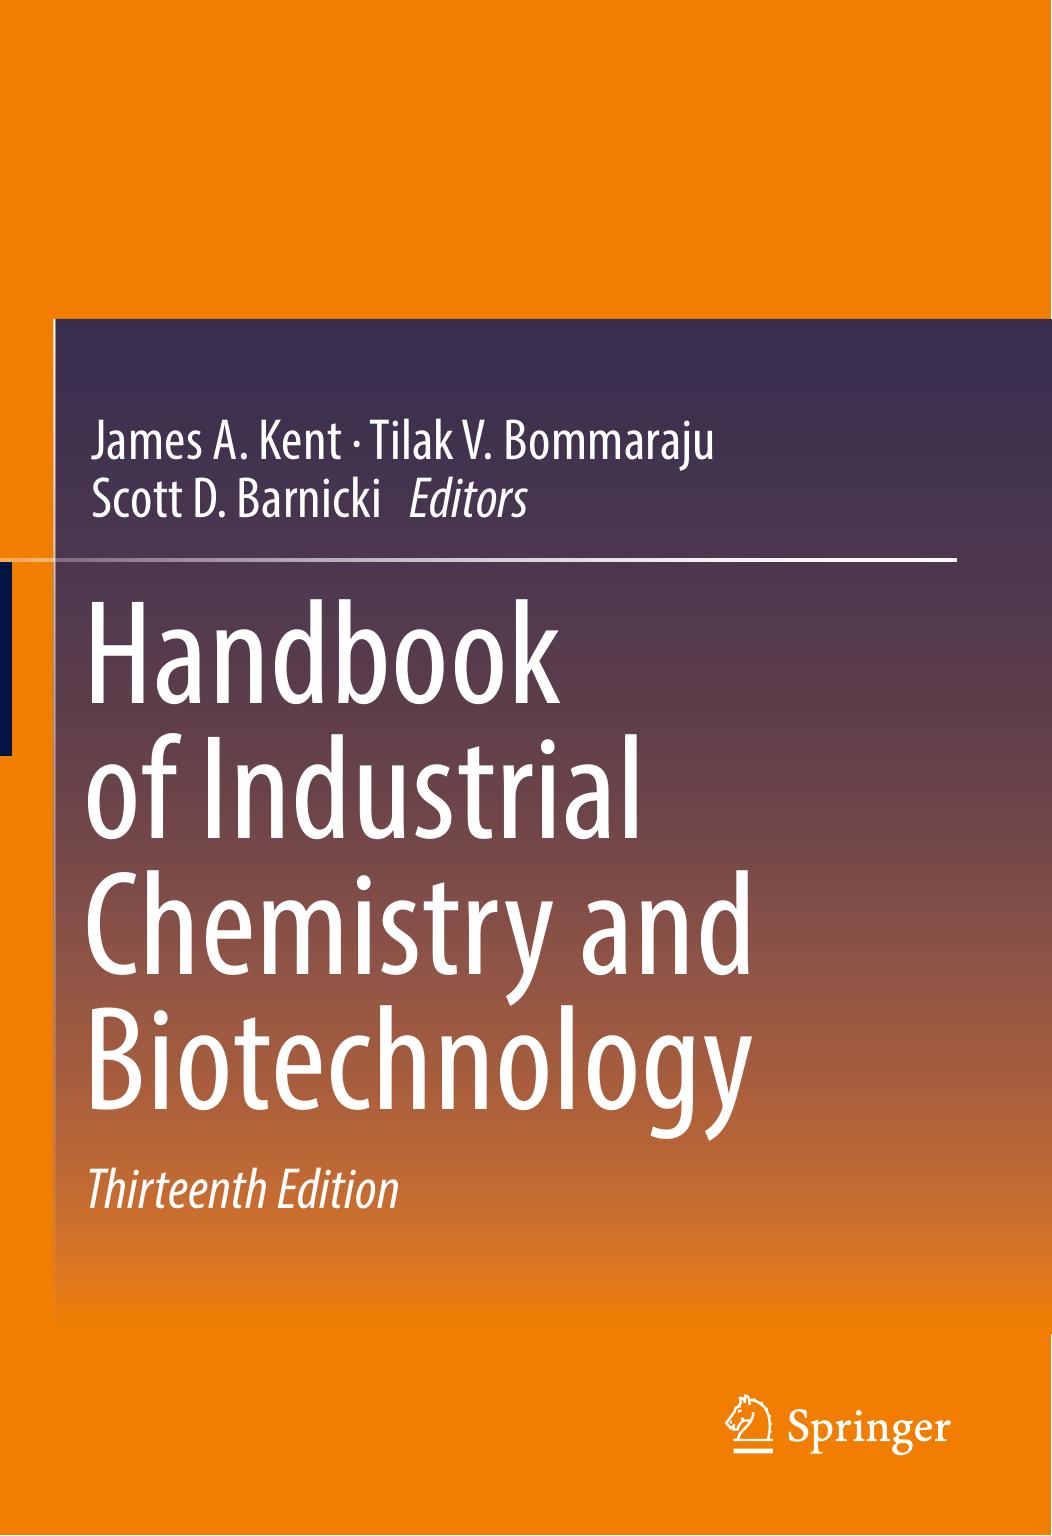 Handbook of industrial chemistry and biotechnology ( PDFDrive )